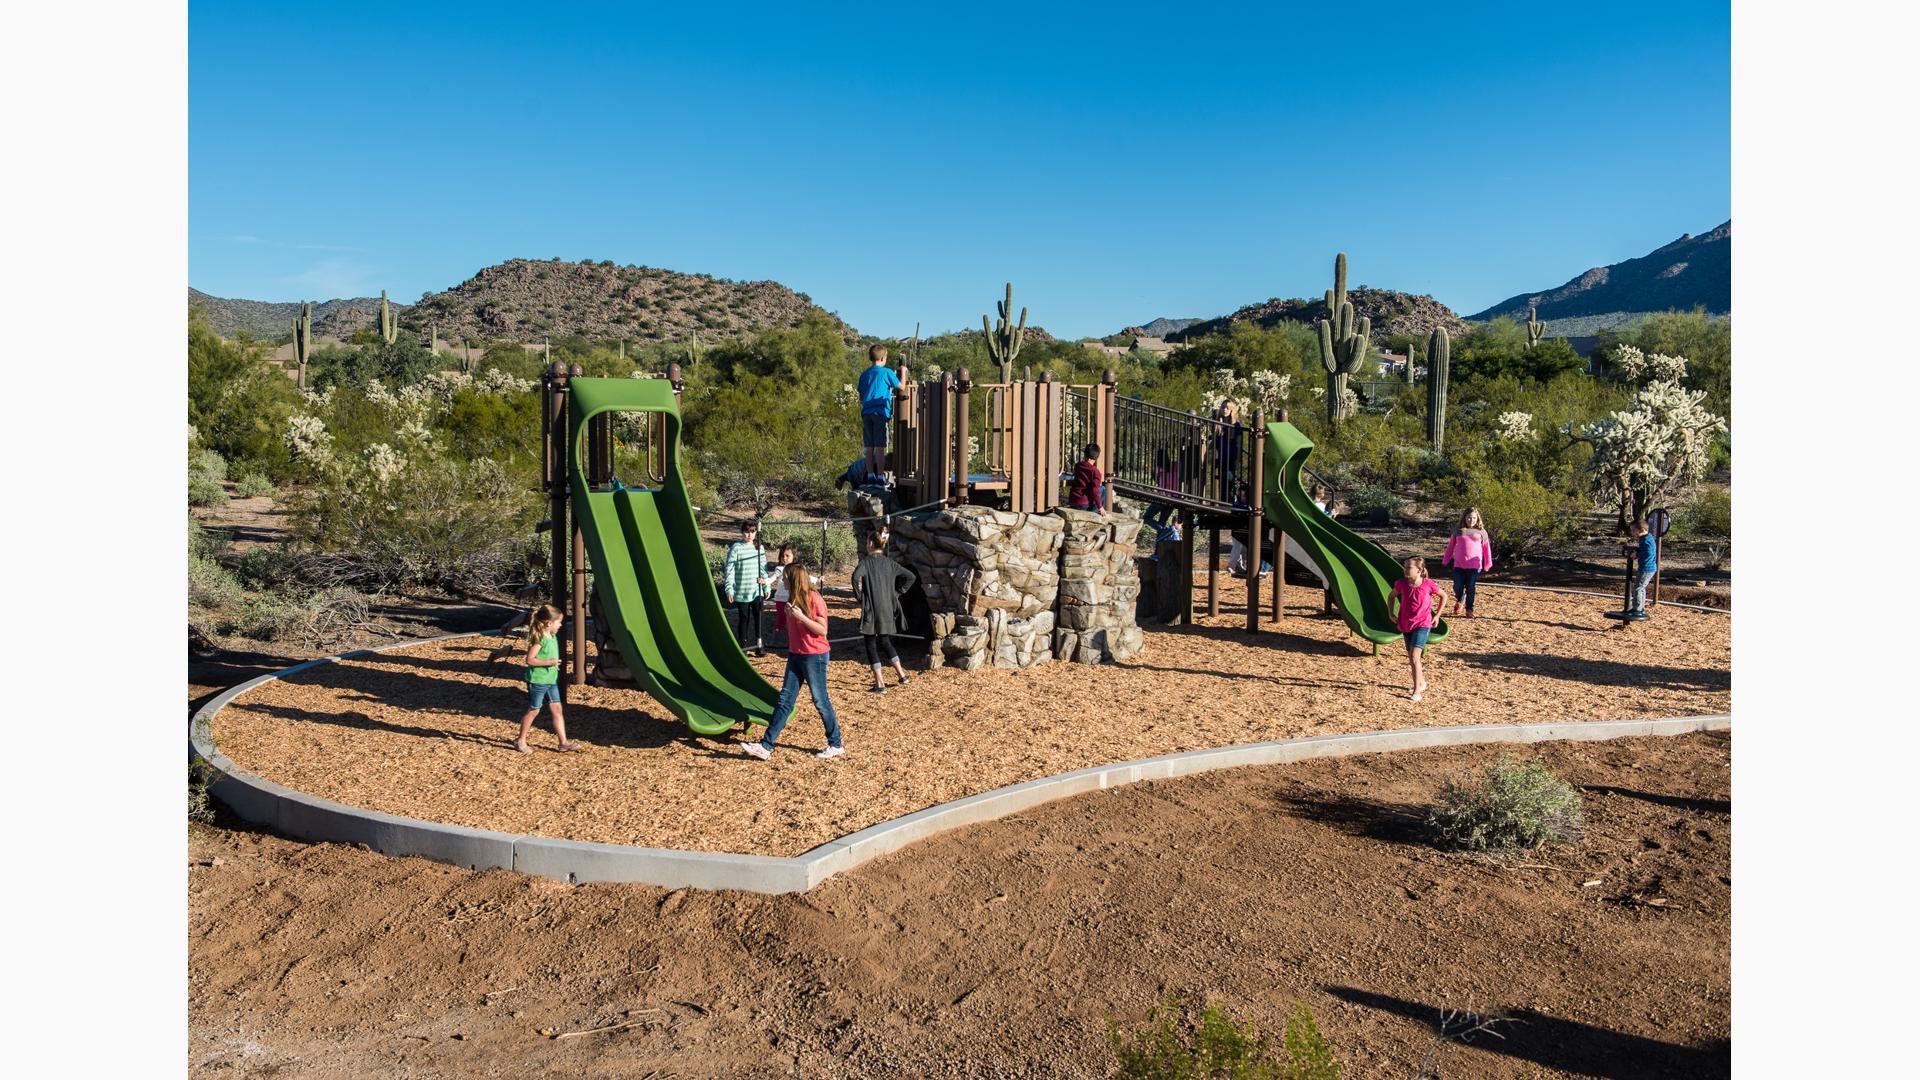 Mimicking the desert landscape around it, Desert Arroyo Park in Mesa, AZ features a natural play experience. Attached directly to the PlayBooster® playstructure, the Canyon Collection® kindles the spirit of adventure while encouraging continuous play that's both physical and imaginative.